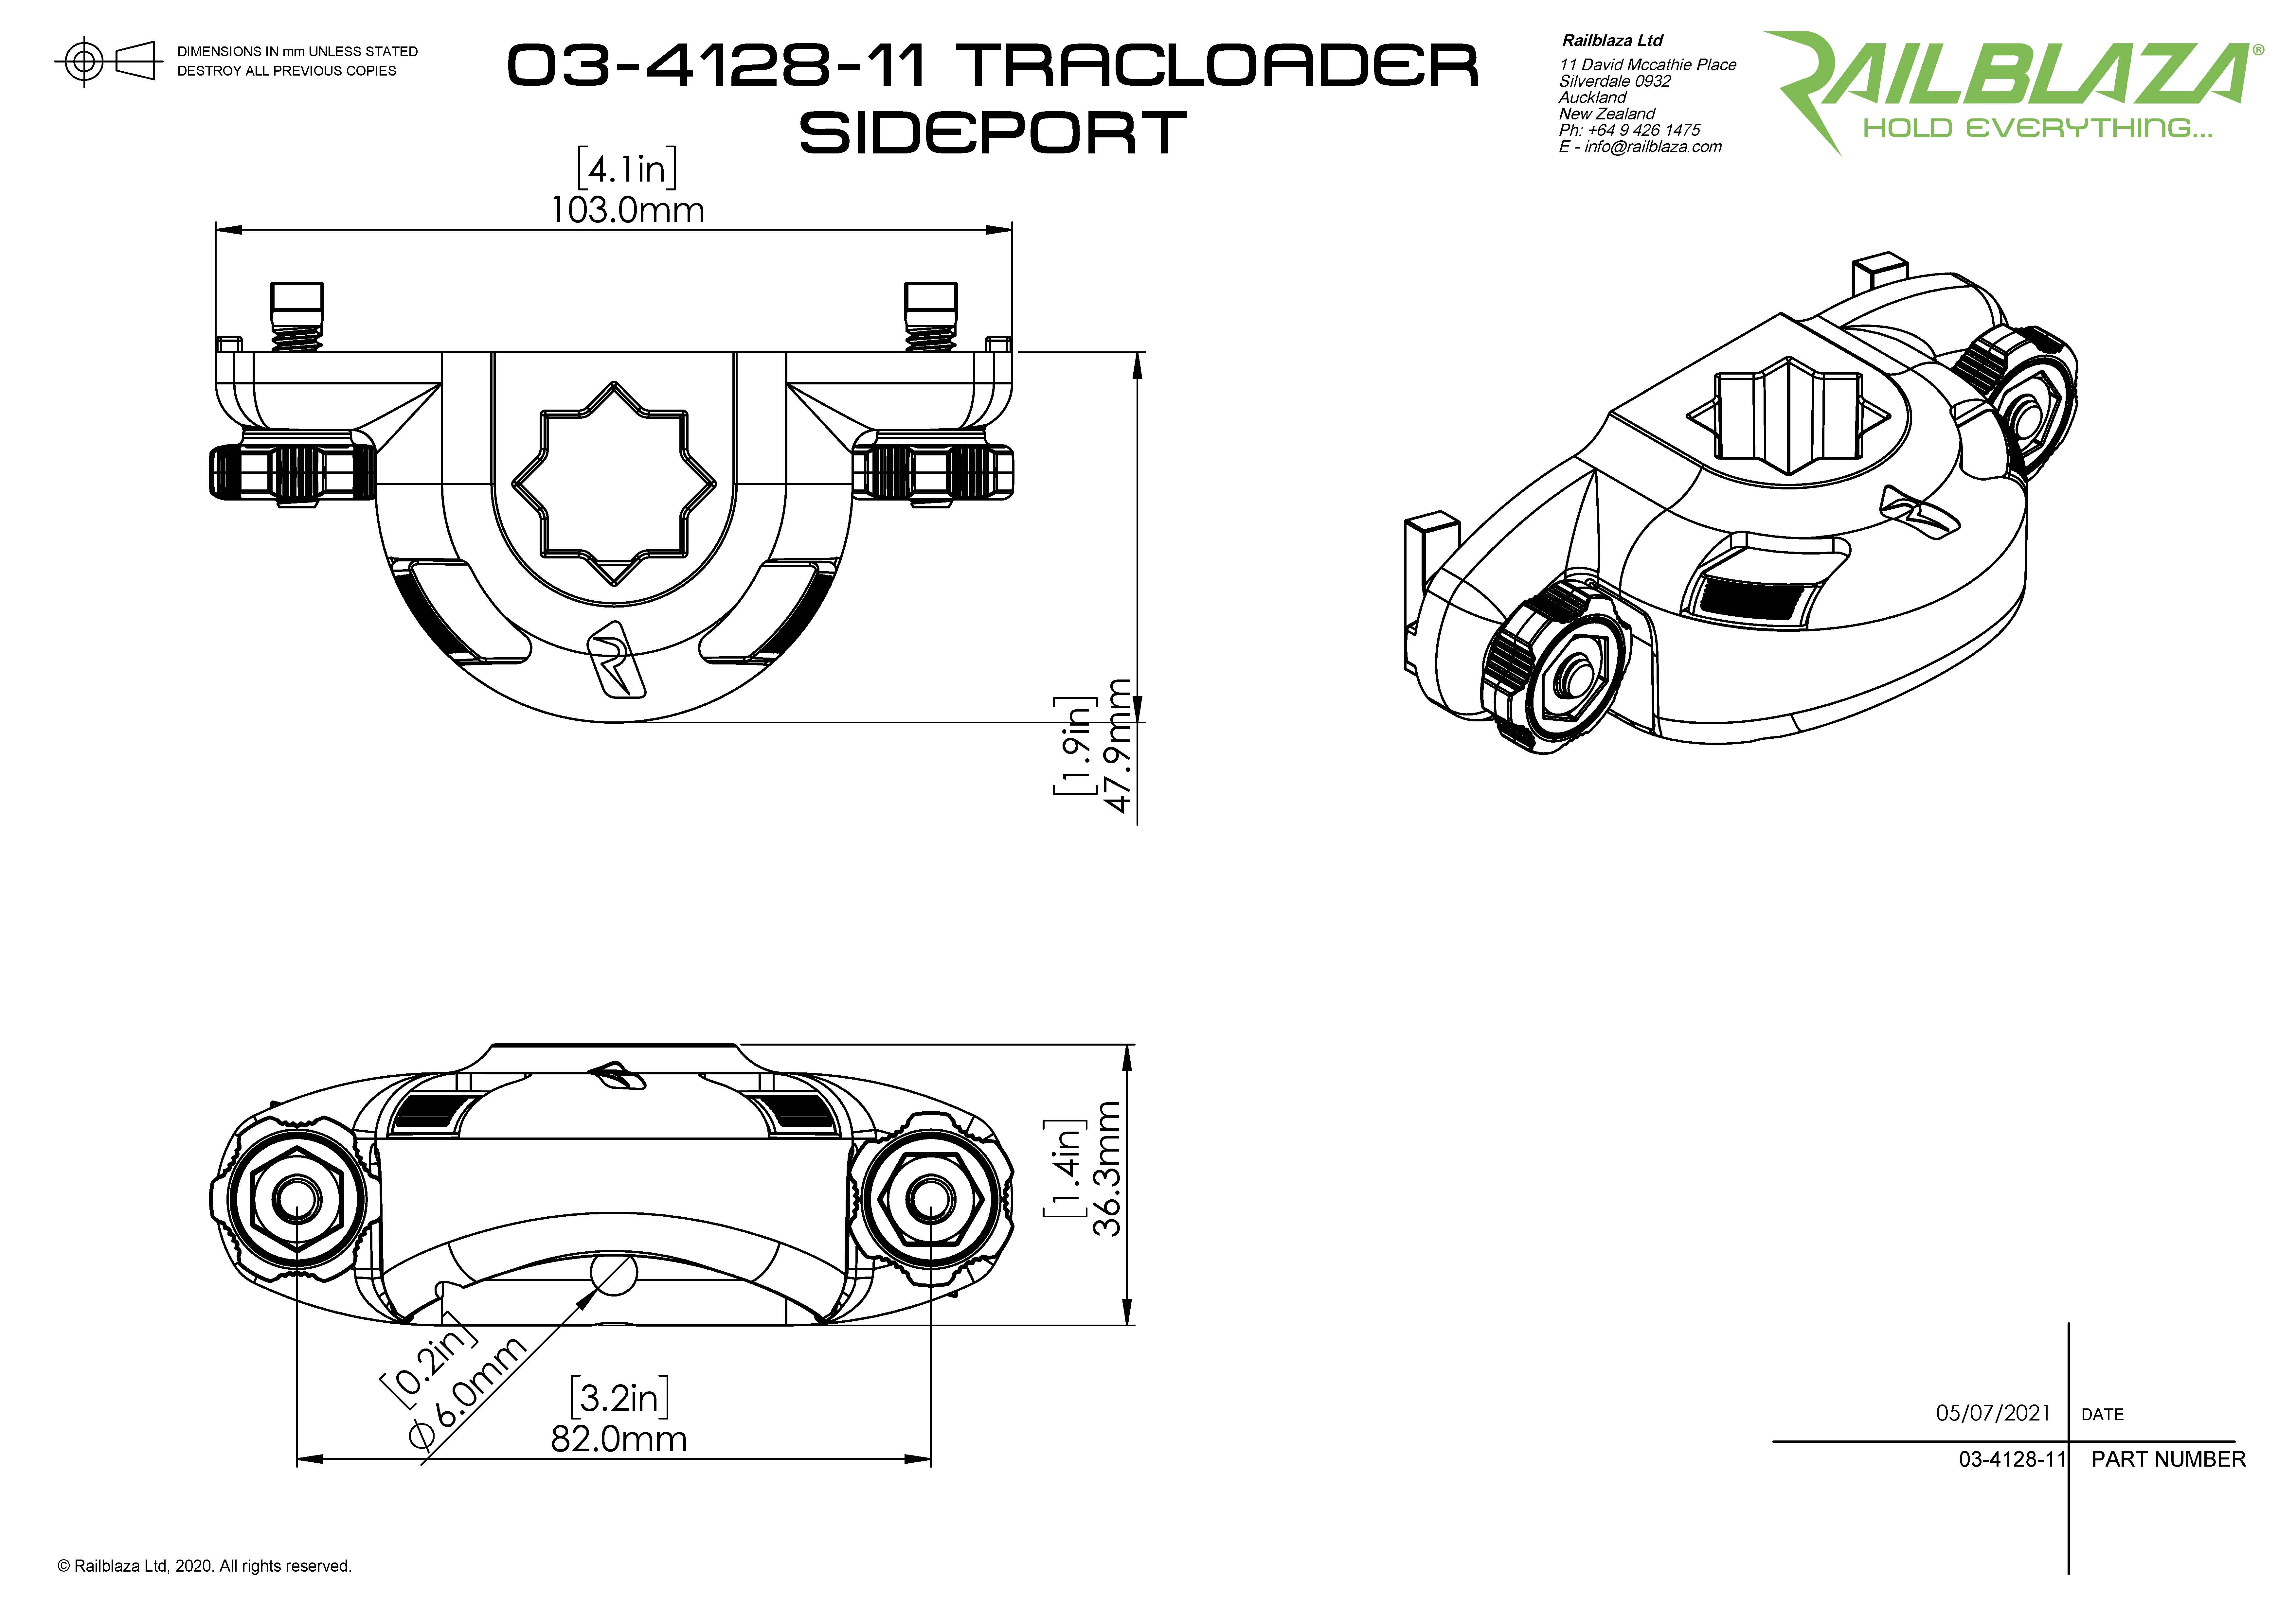 TracLoader-SidePort-TracLoader-SidePort-Dimensioned-Drawing-3414_193958.jpg